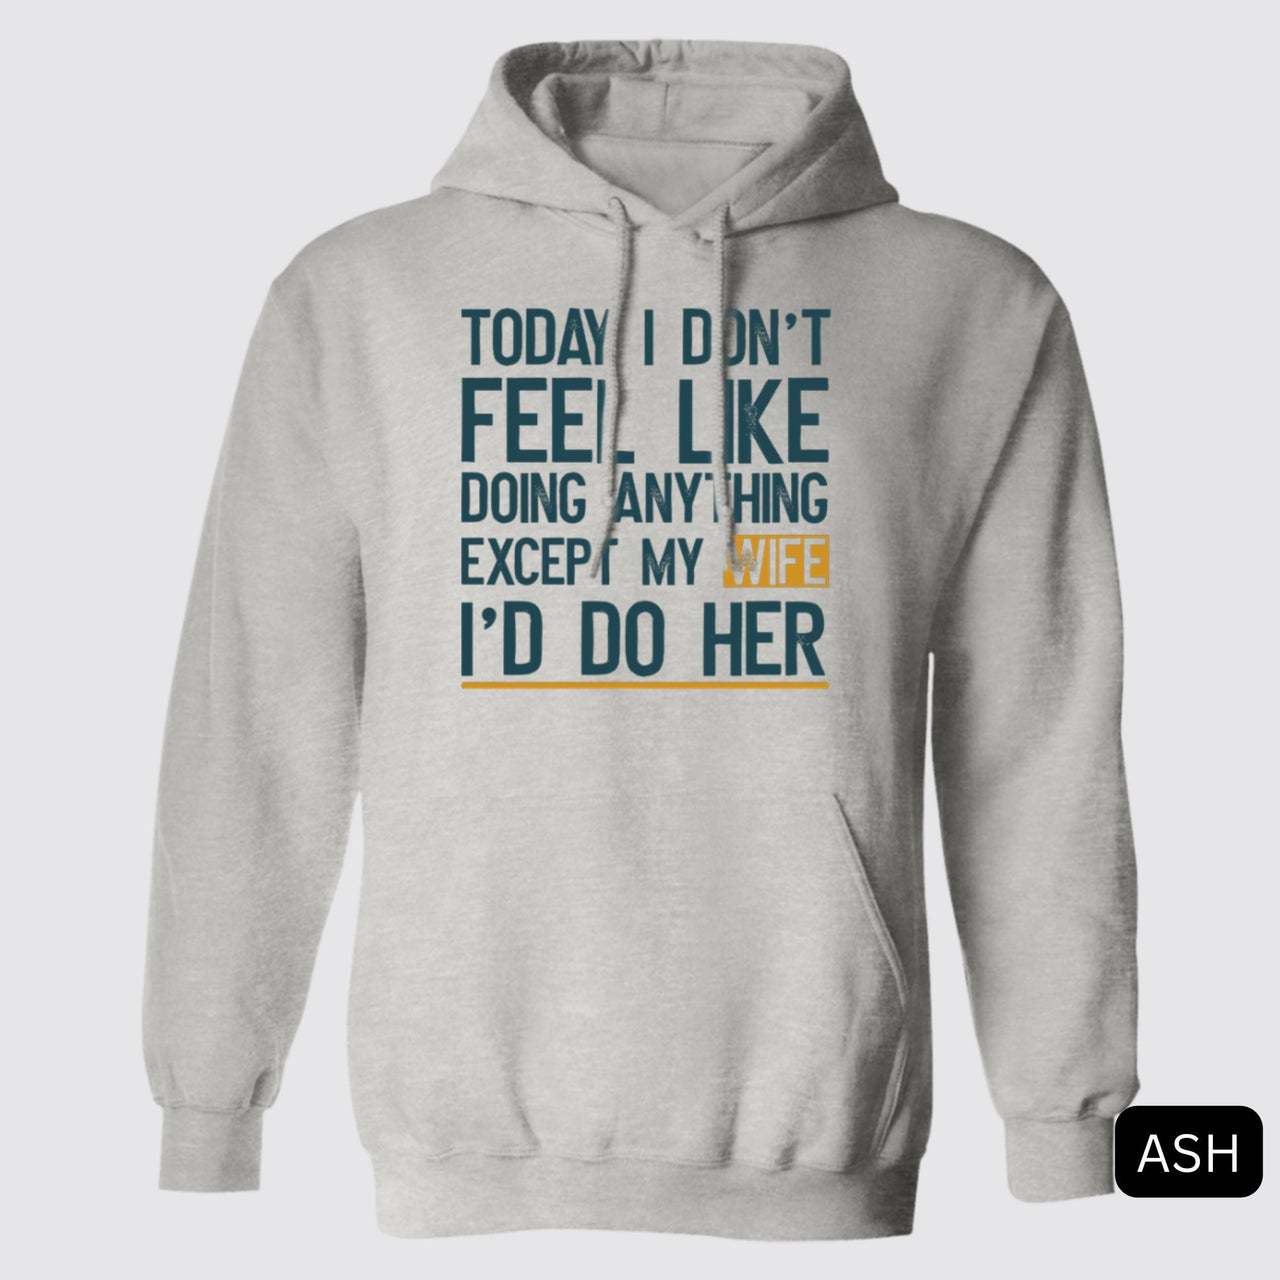 Today I Don't Feel Like Doing Anything Except My Wife I'll Do Her Hoodie